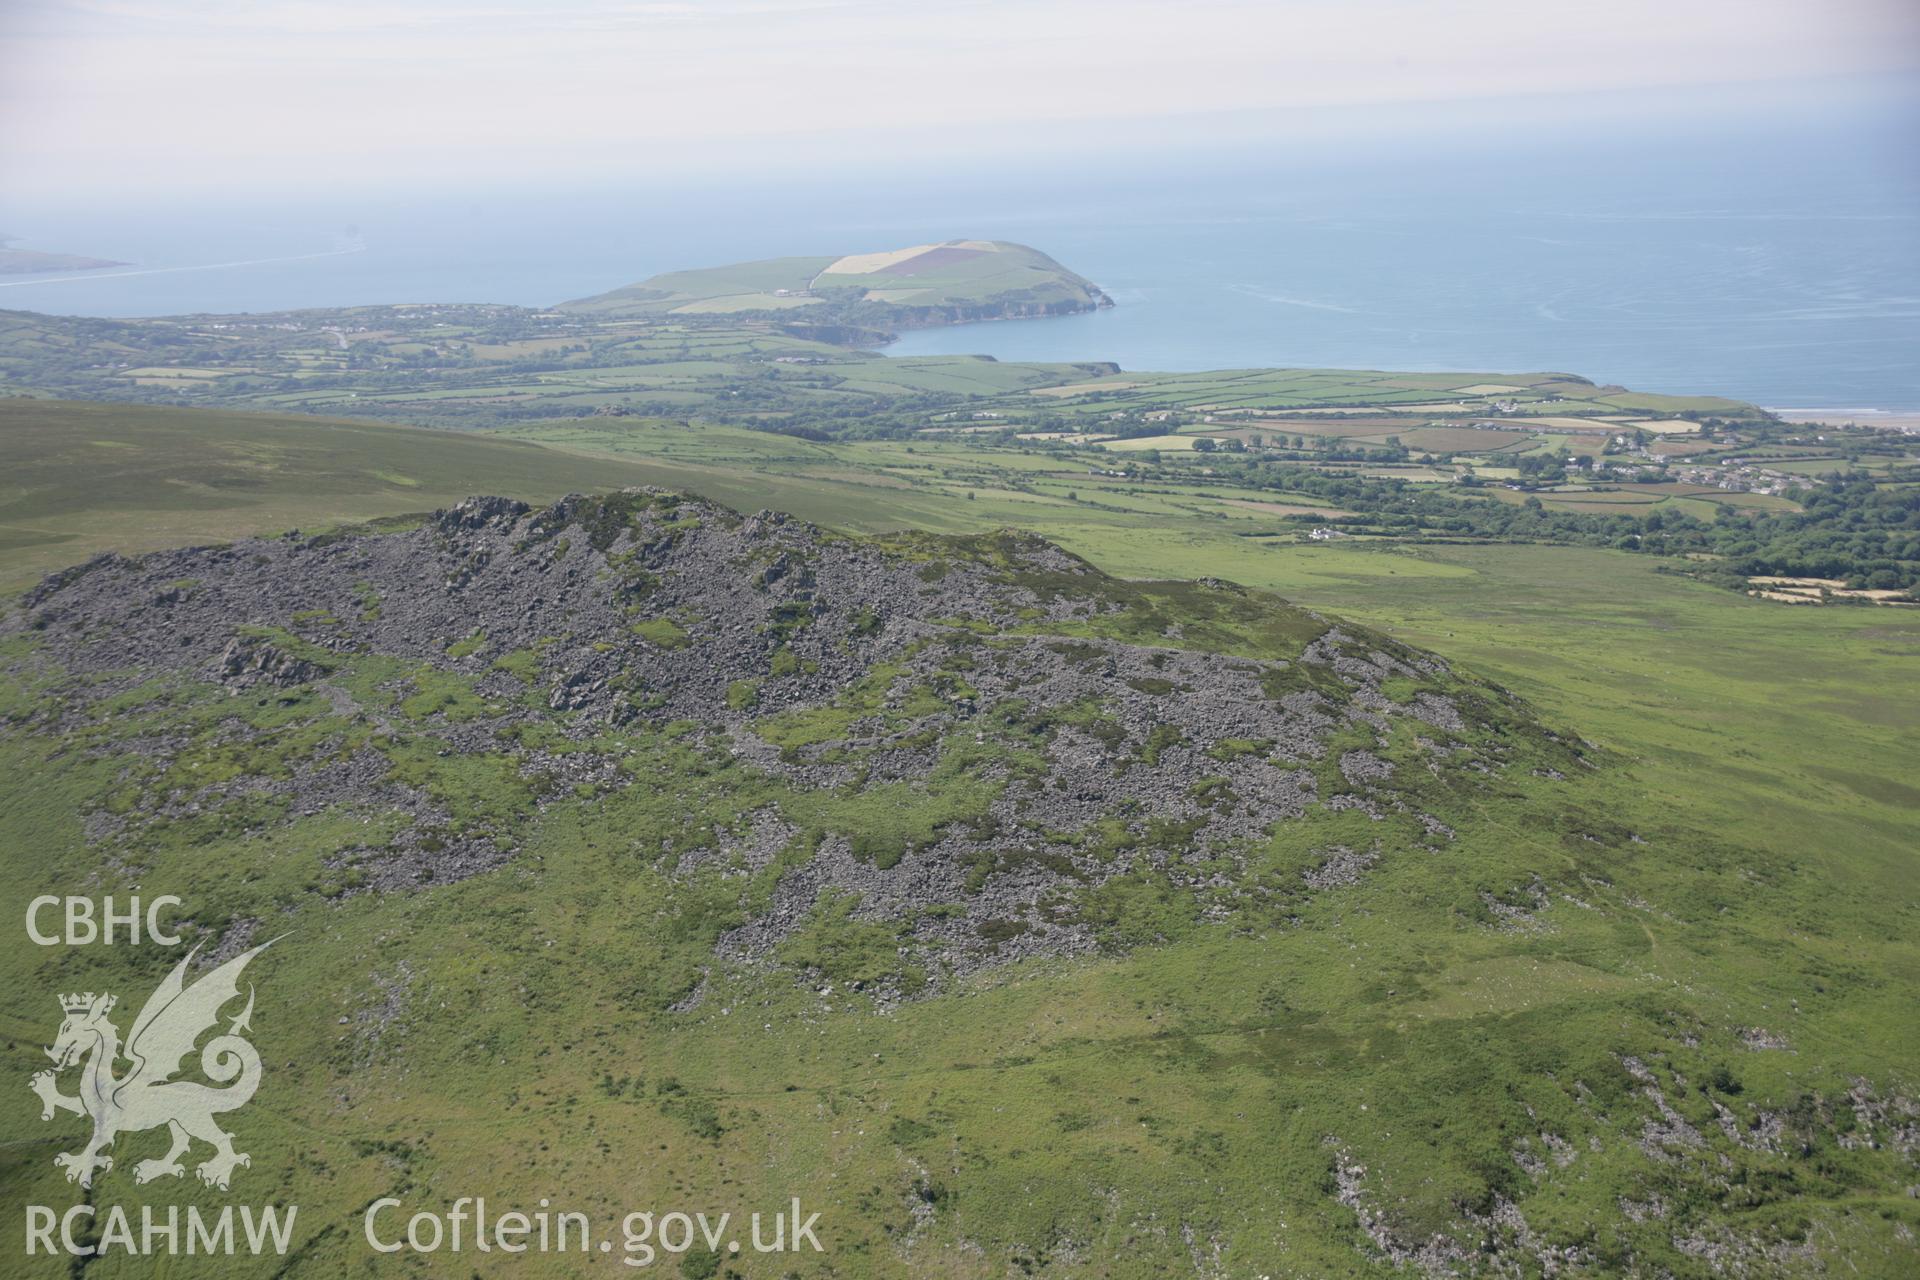 RCAHMW colour oblique aerial photograph of Carn Ingli Camp. A view from the south-east towards Dinas Head. Taken on 23 June 2005 by Toby Driver